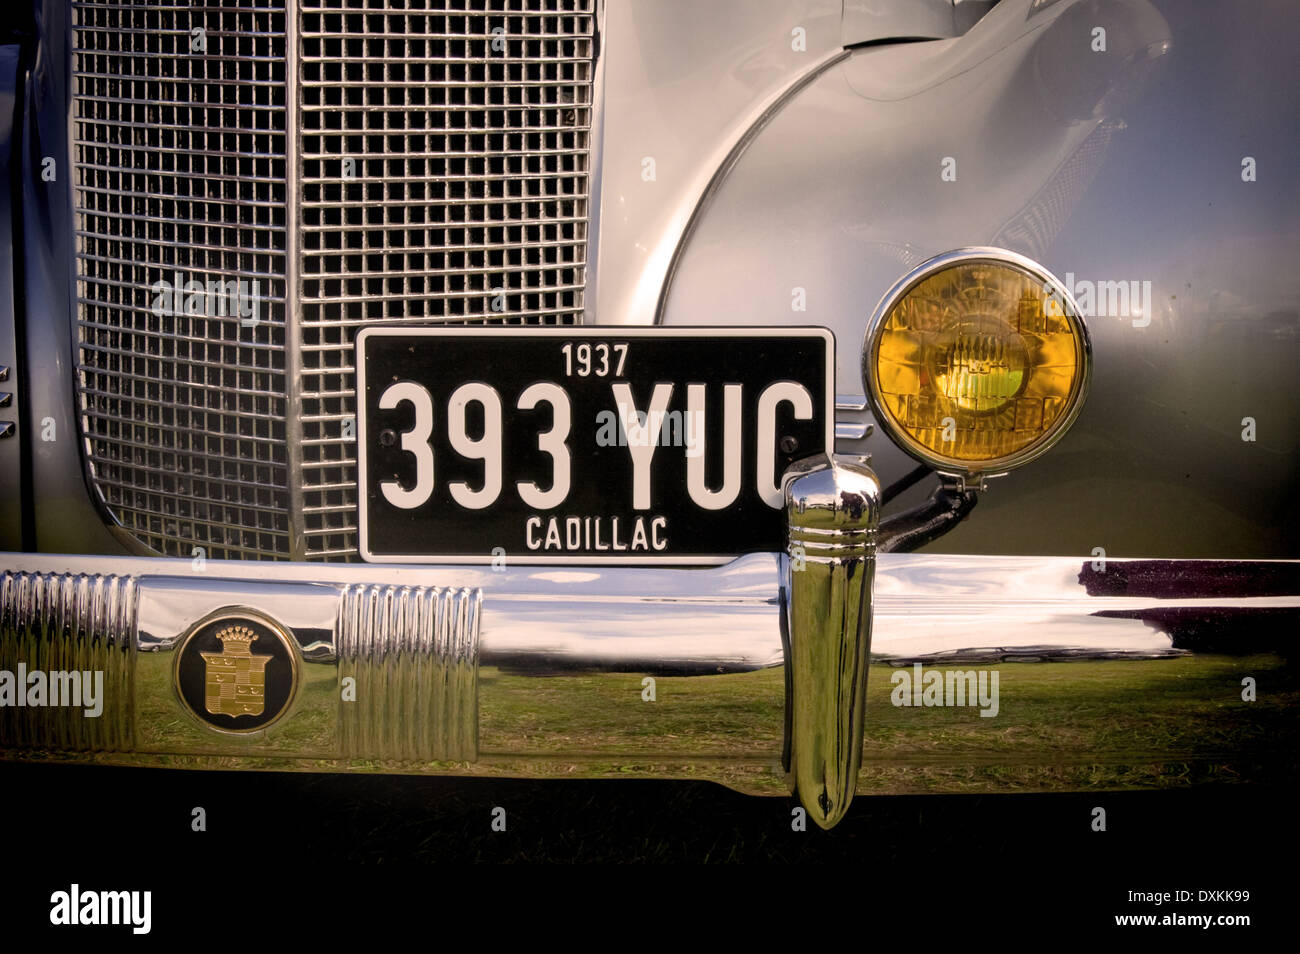 Close-up of the front of a classic1937 Cadillac Stock Photo